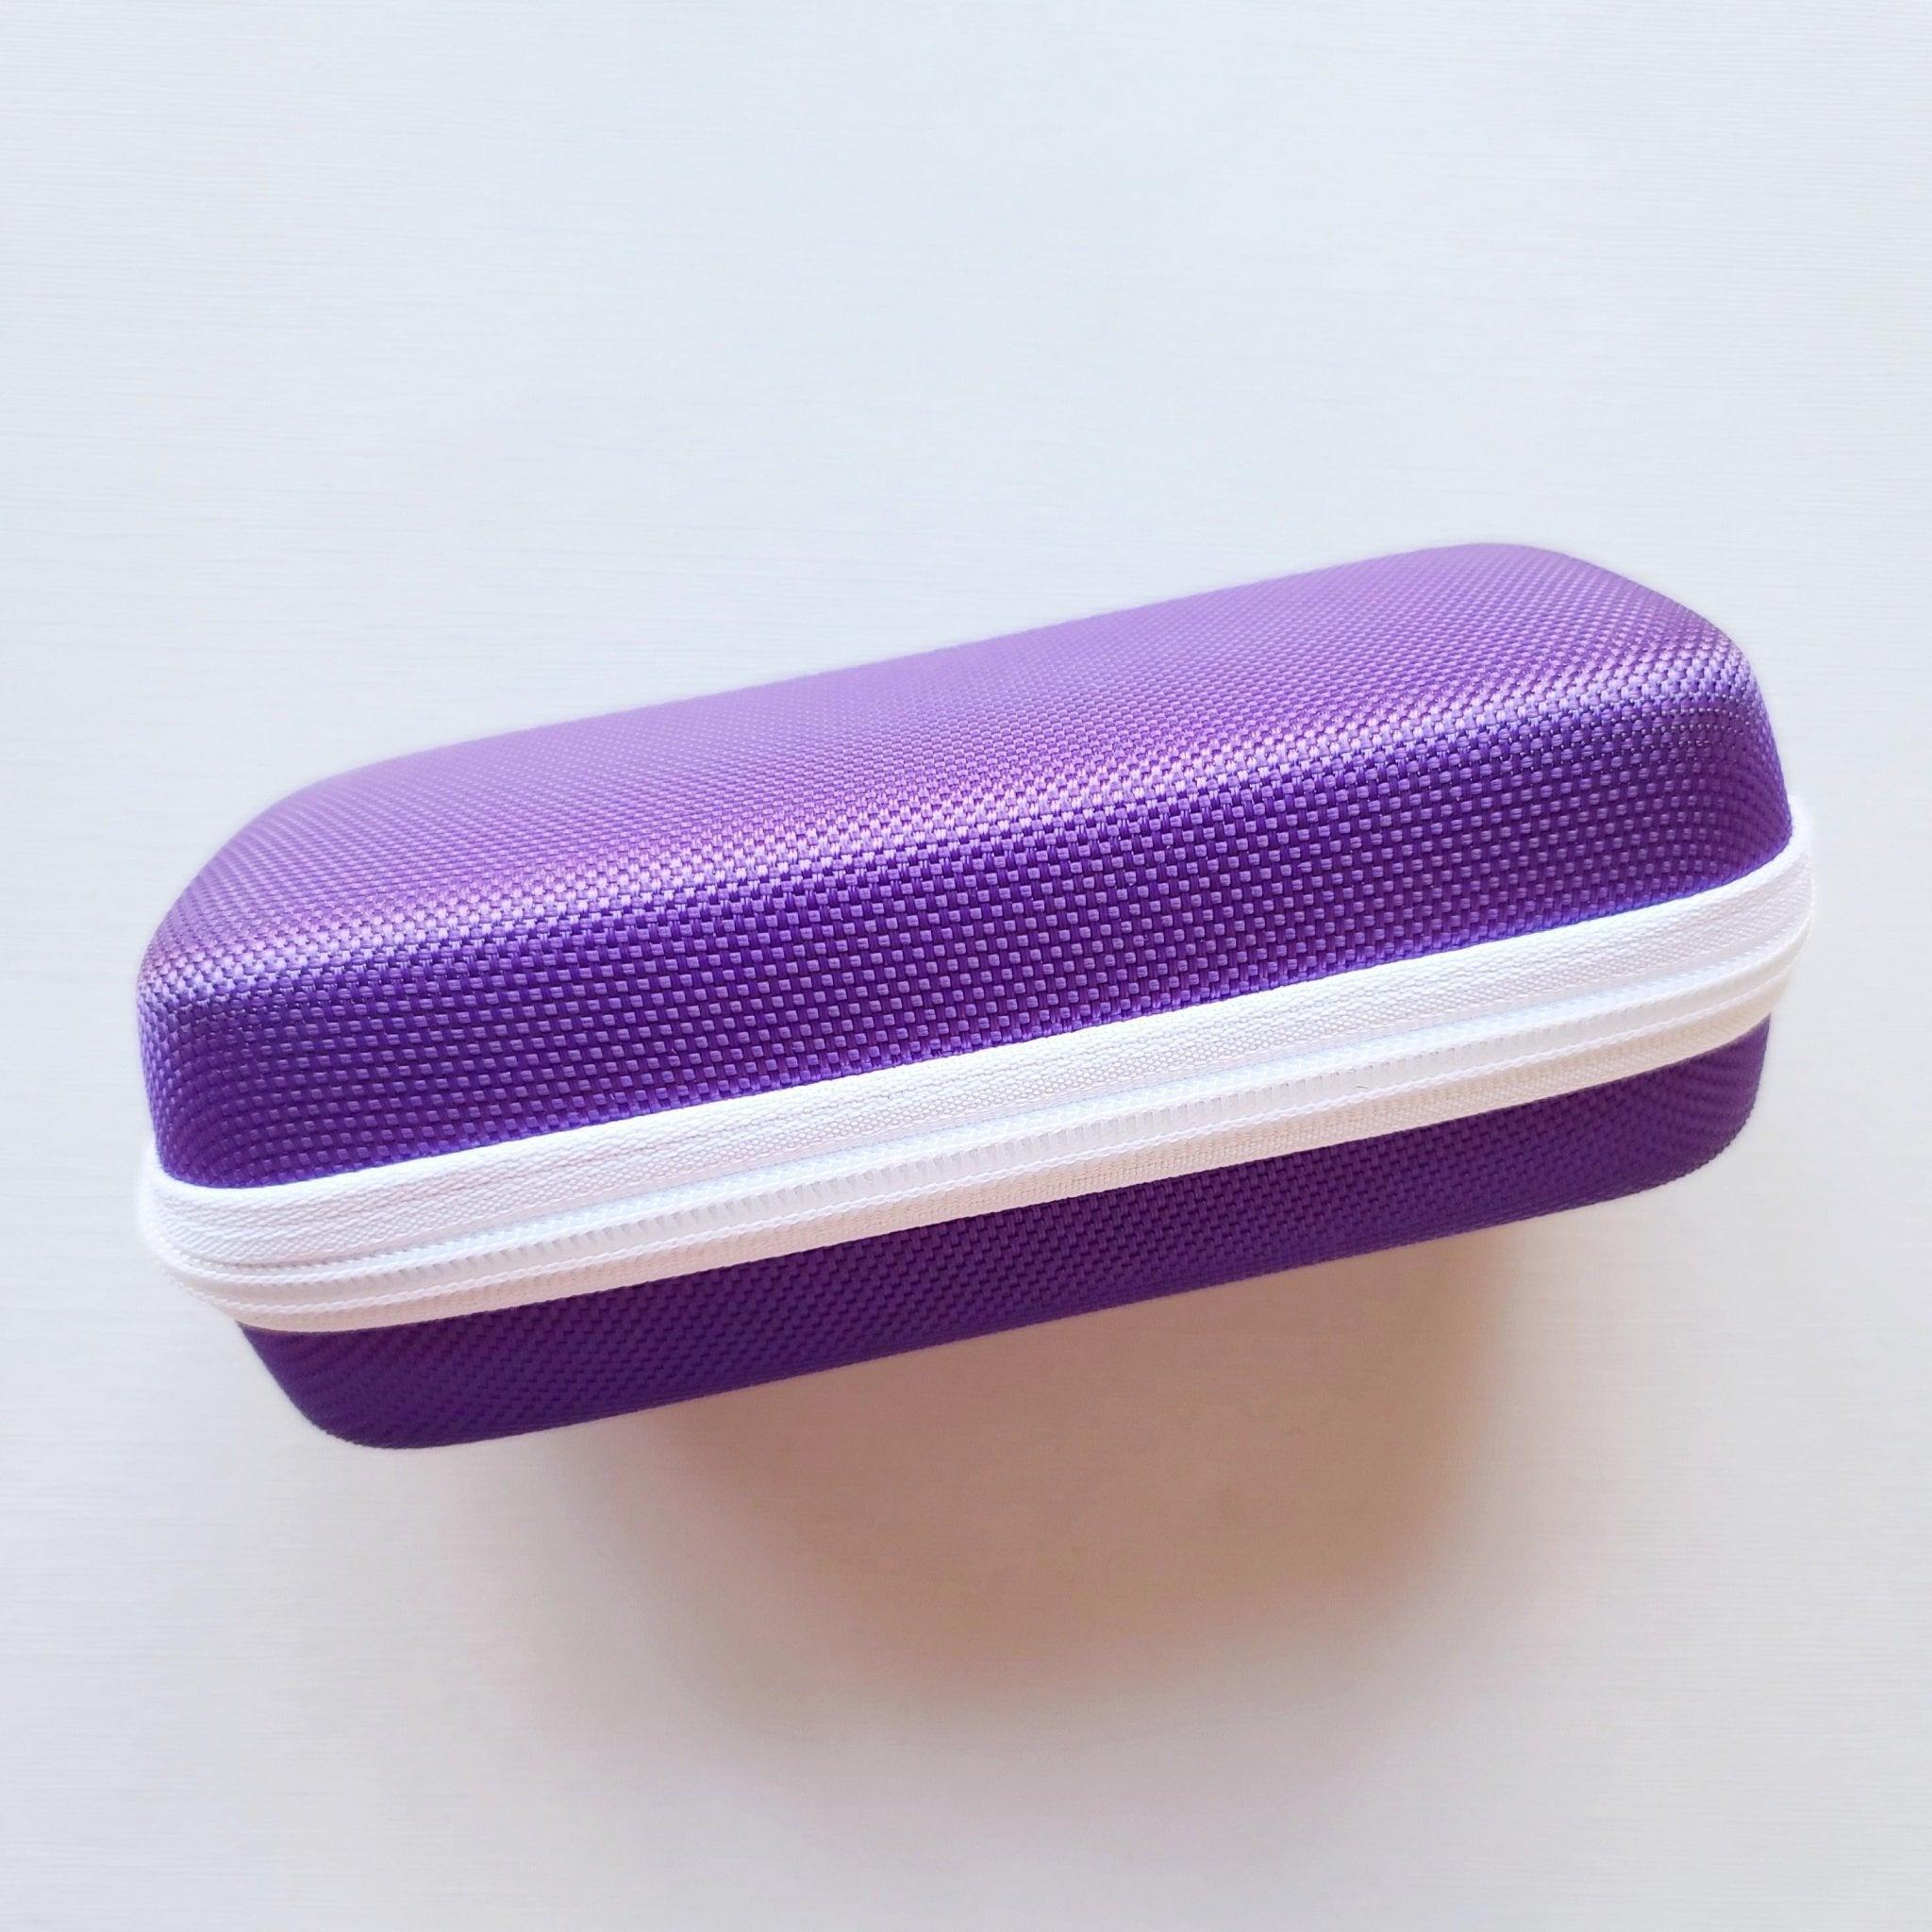 Textured Hard Shell Essential Oil Carry Travel Case - 10 Bottles